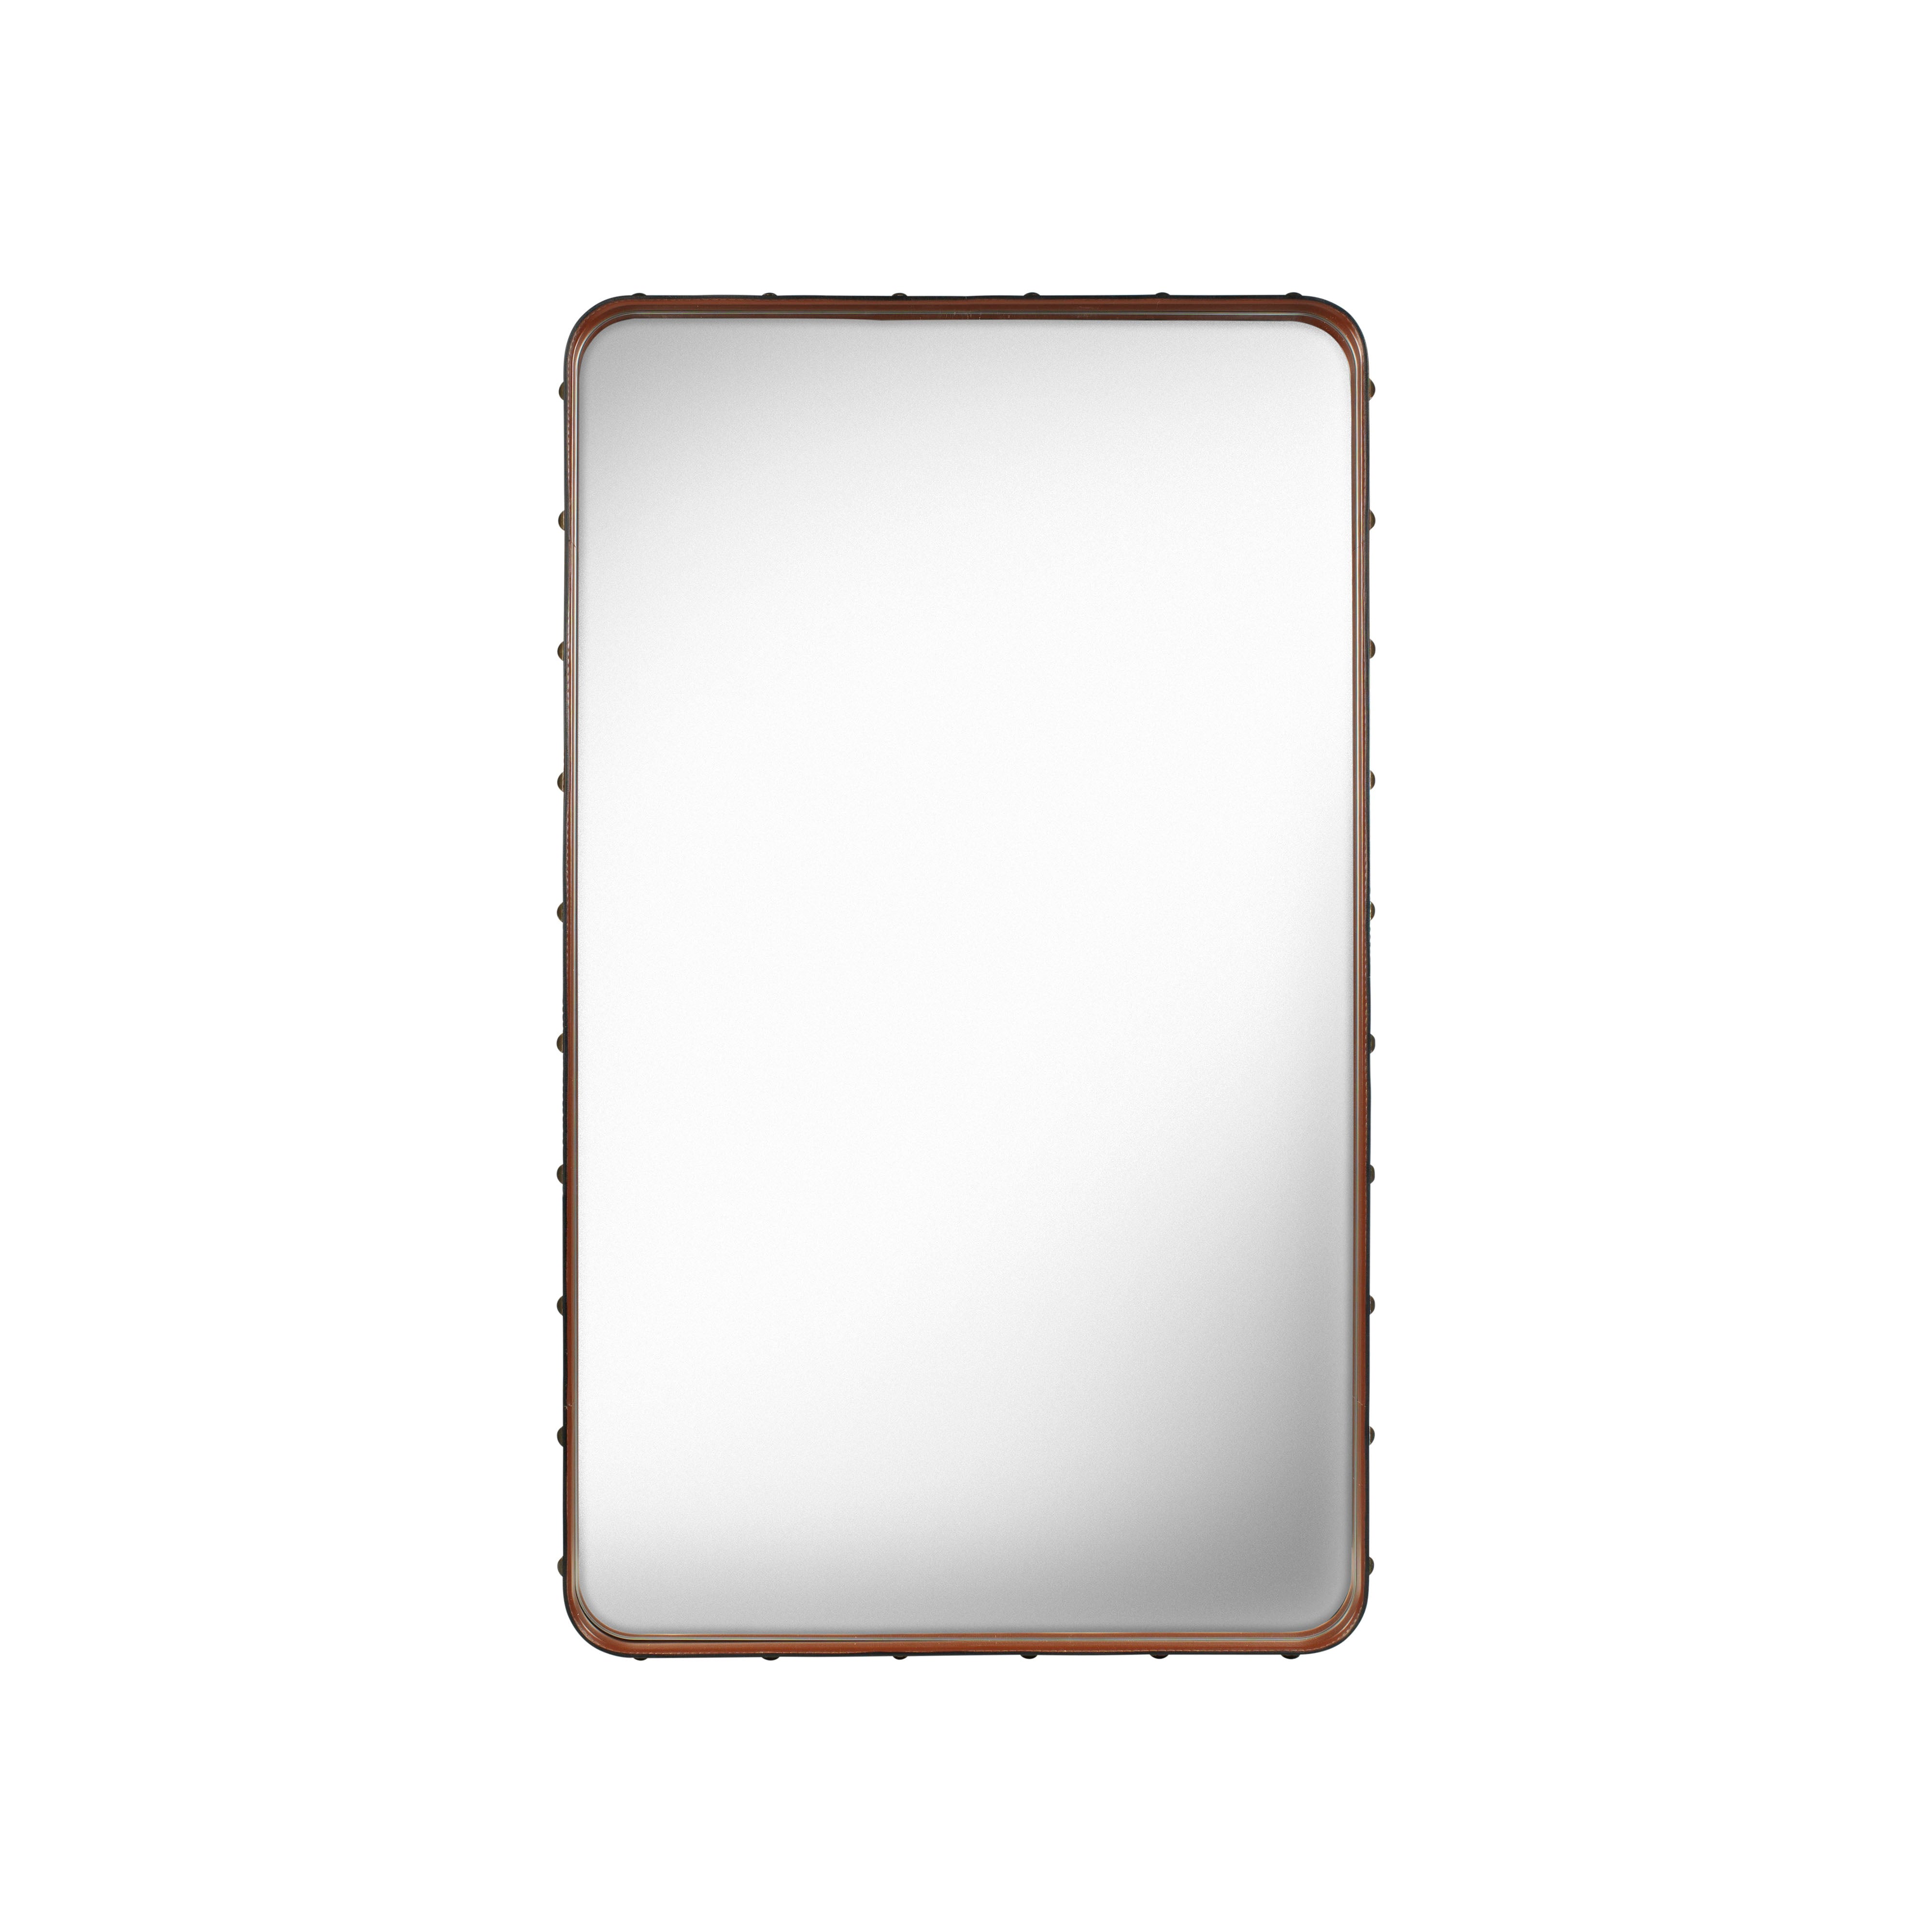 Adnet Rectangulaire Wall Mirror: Small - 45.3